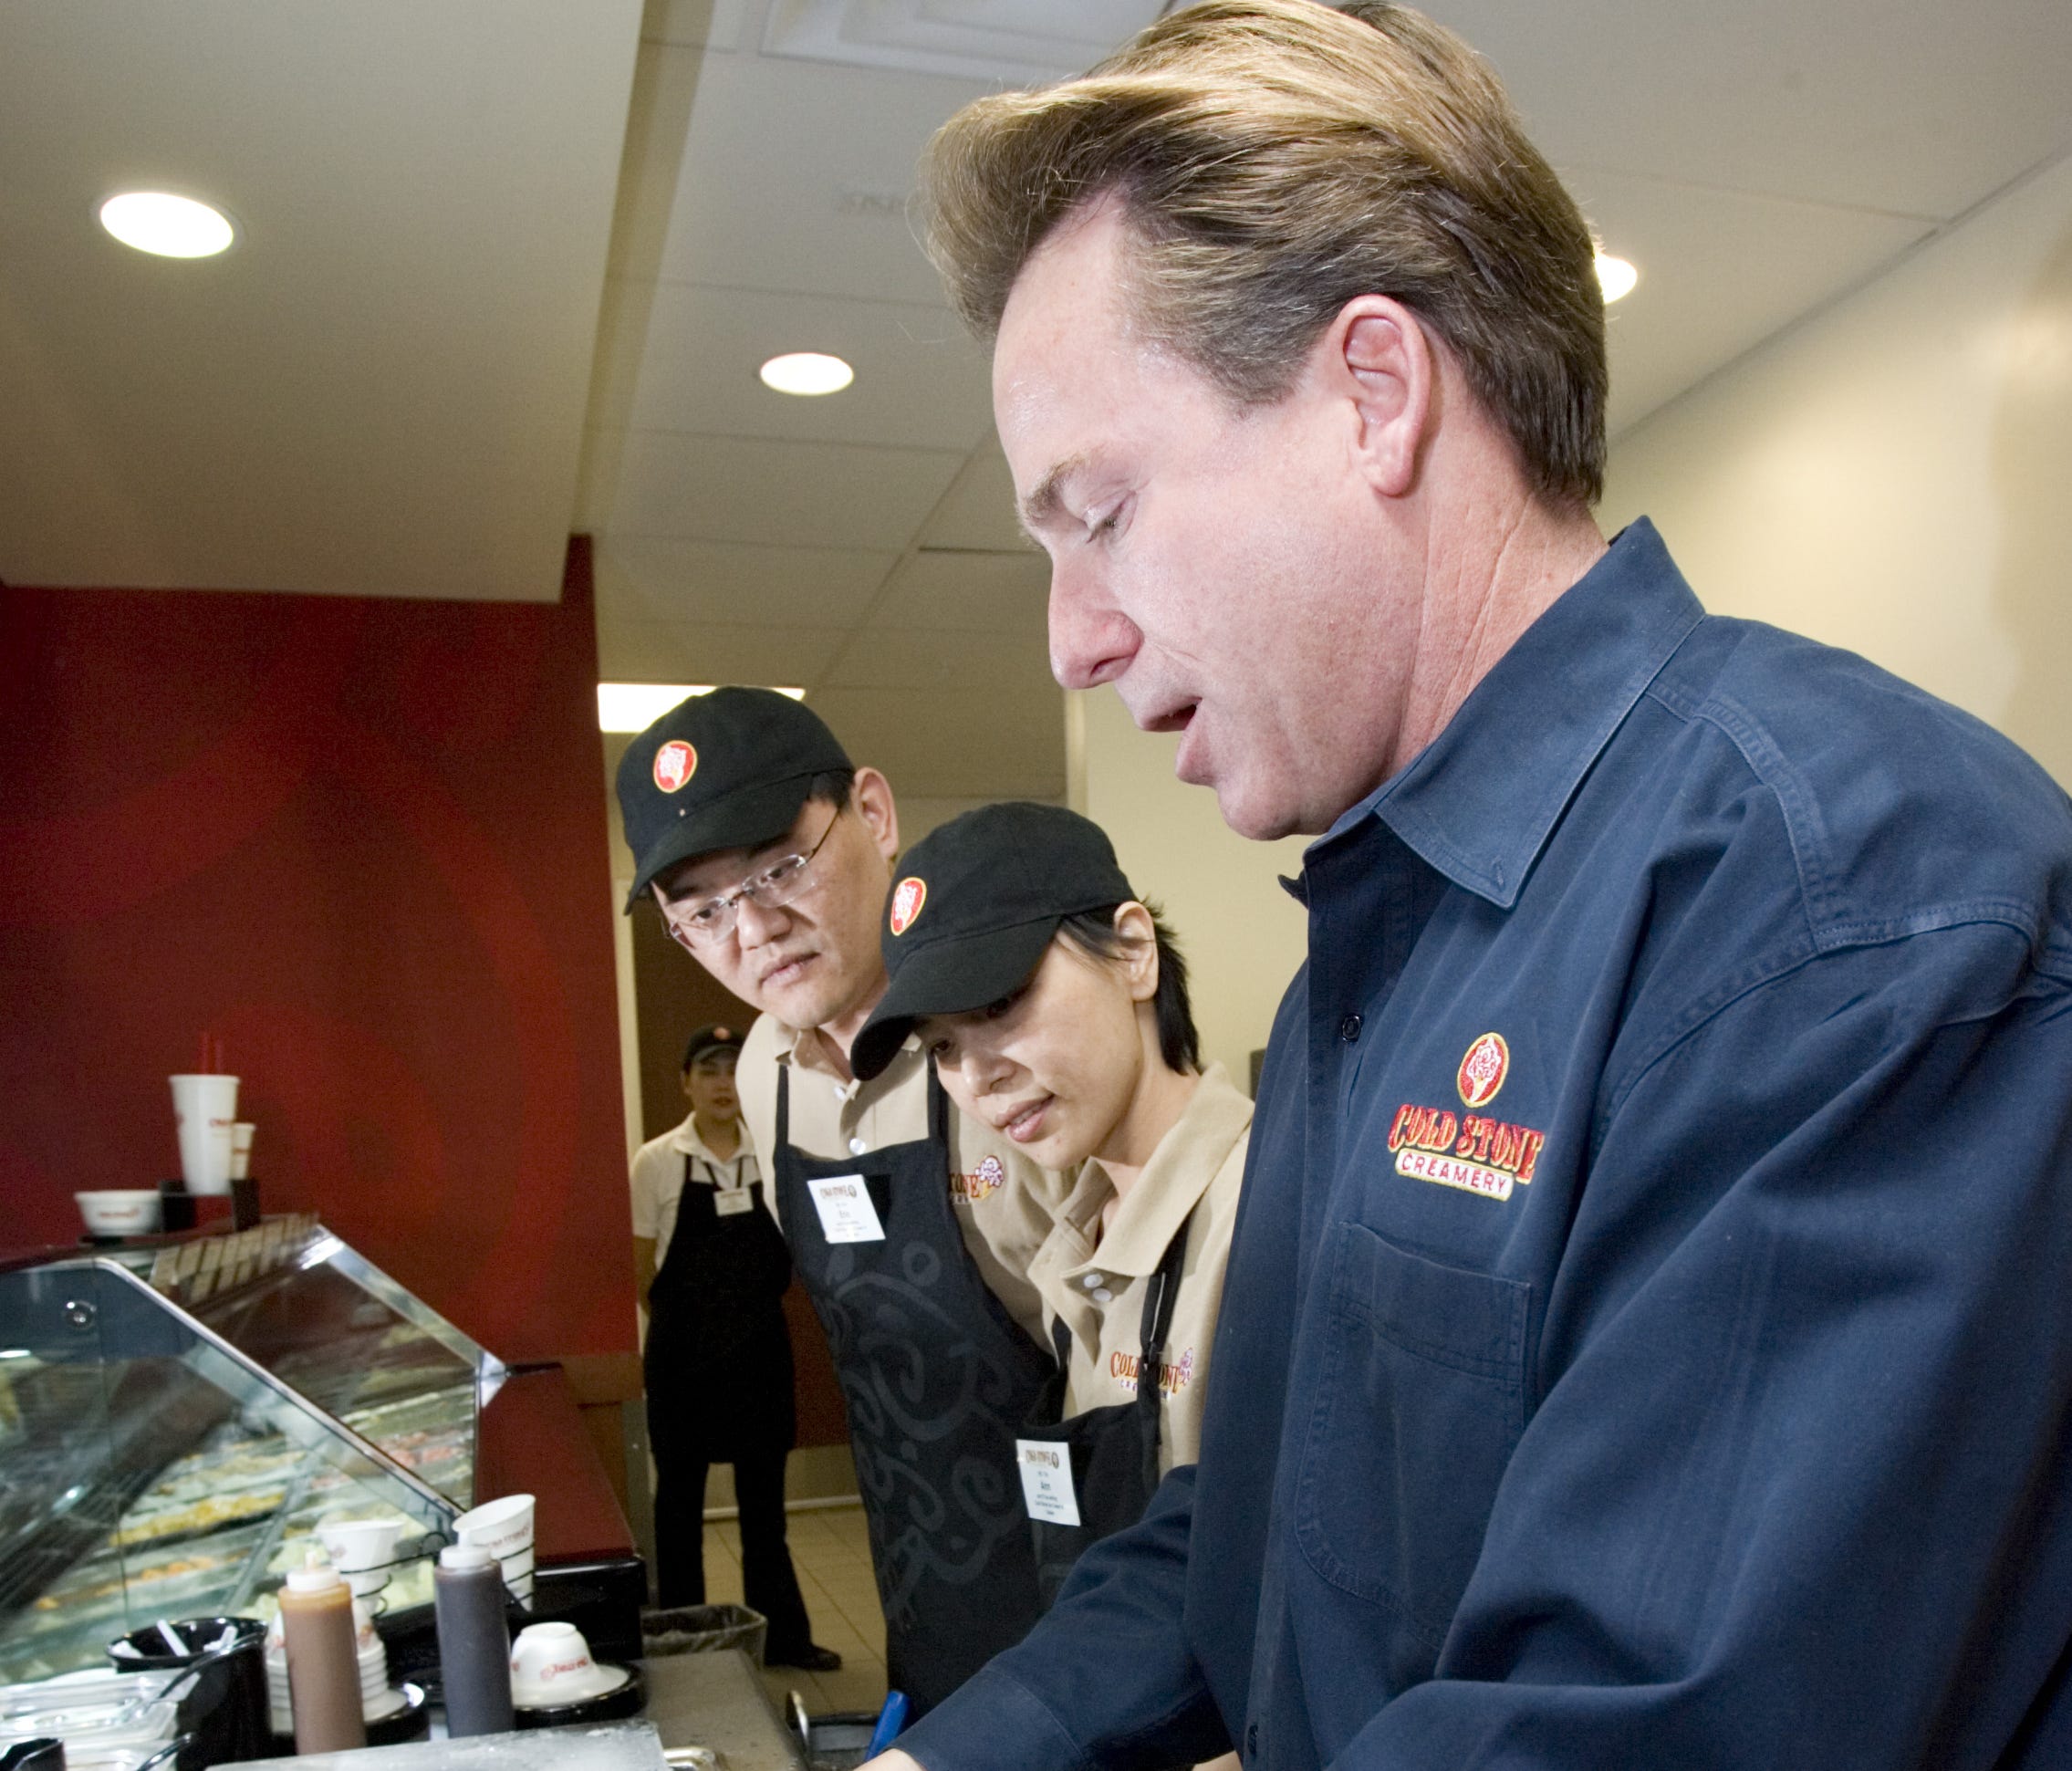 A photo of Lee Edward Knowlton at Cold Stone Creamery on Dec. 14, 2006, demonstrating how to mix an ice cream treat.